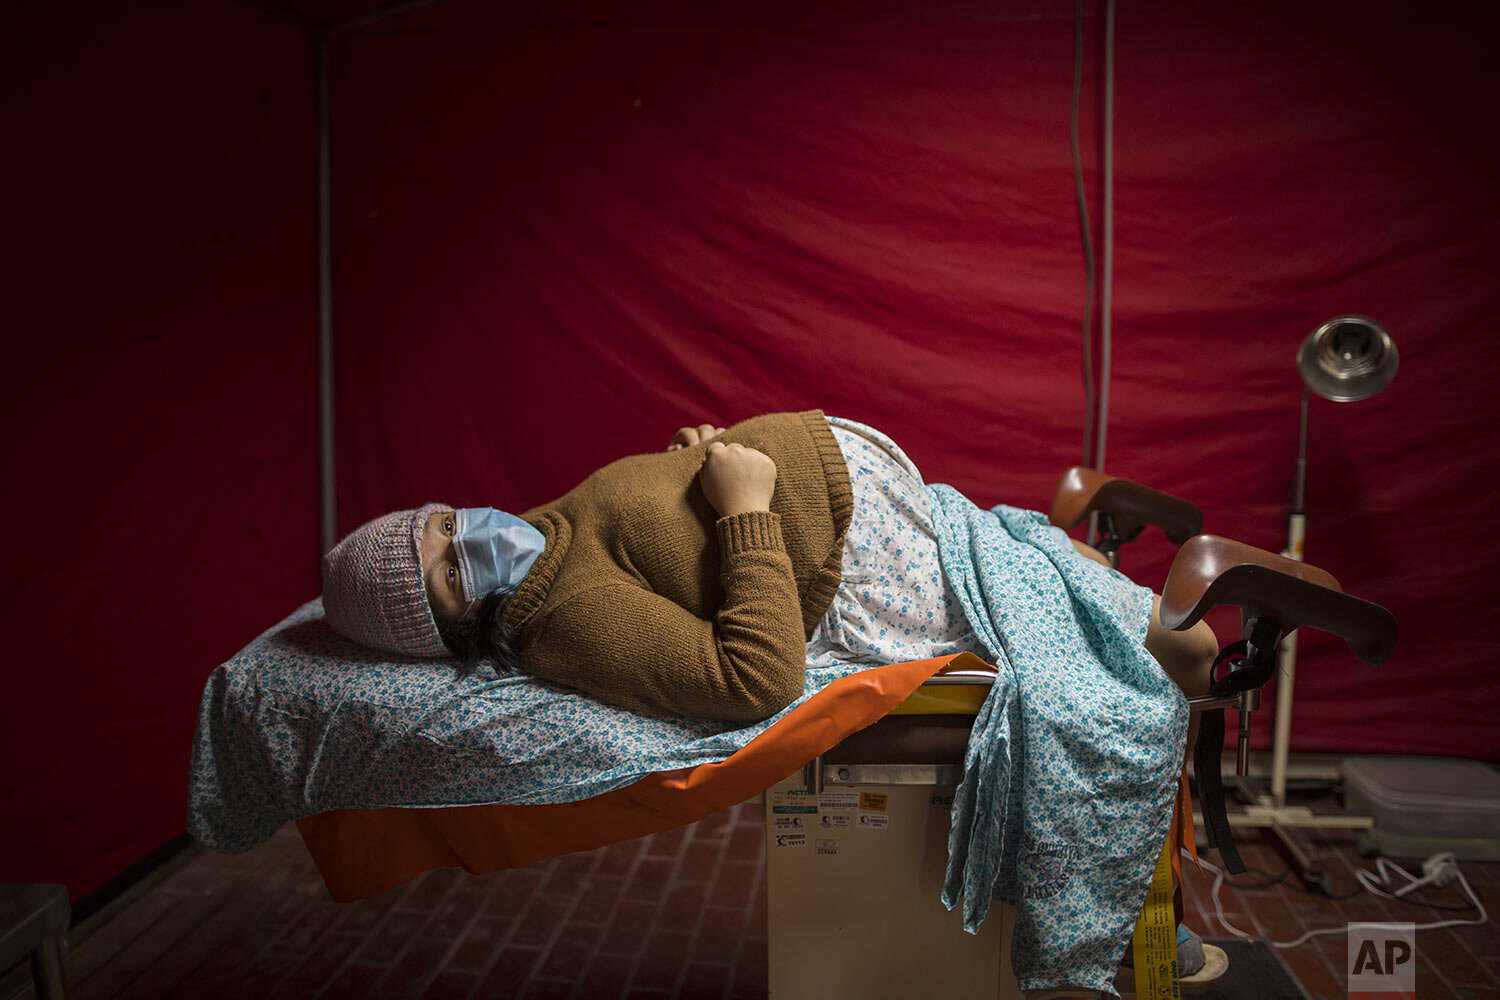  Olinda Tafur, 20, lies on an examination table as she waits to be seen by obstetrician Dr. Osvaldo Sierra inside a tent set up in the emergency area of the National Perinatal and Maternal Institute to receive women in labor who are infected with COV